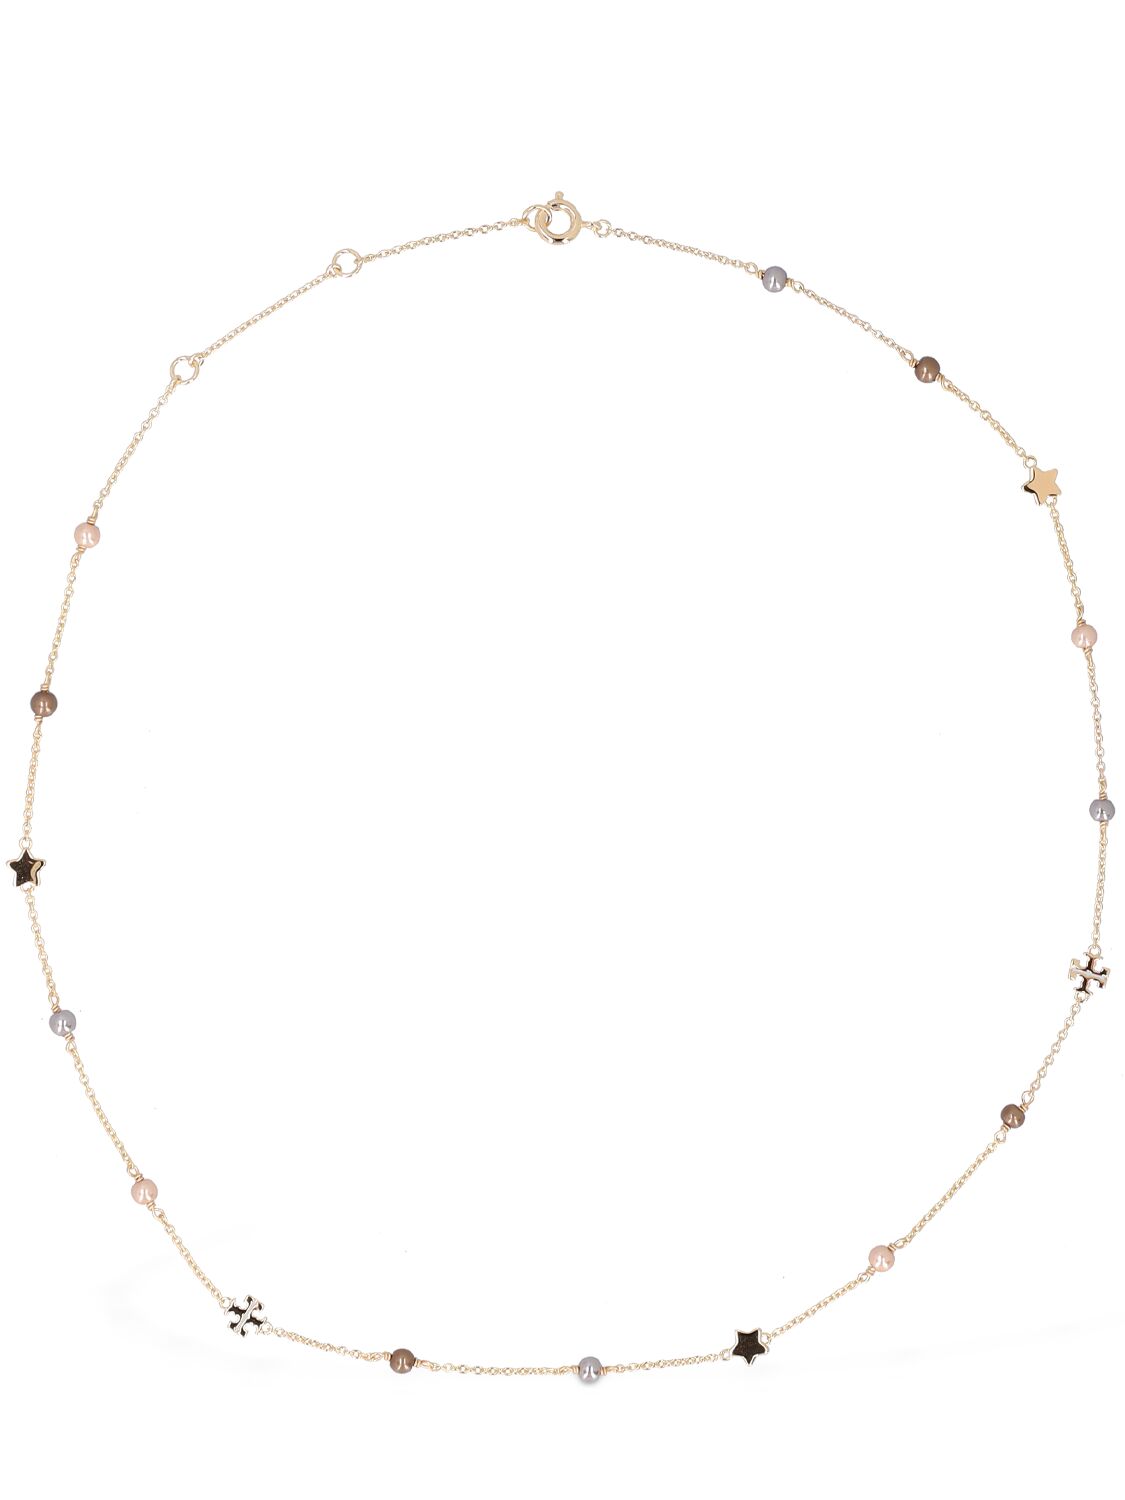 Delicate Kira Faux Pearl Necklace – WOMEN > JEWELRY & WATCHES > NECKLACES